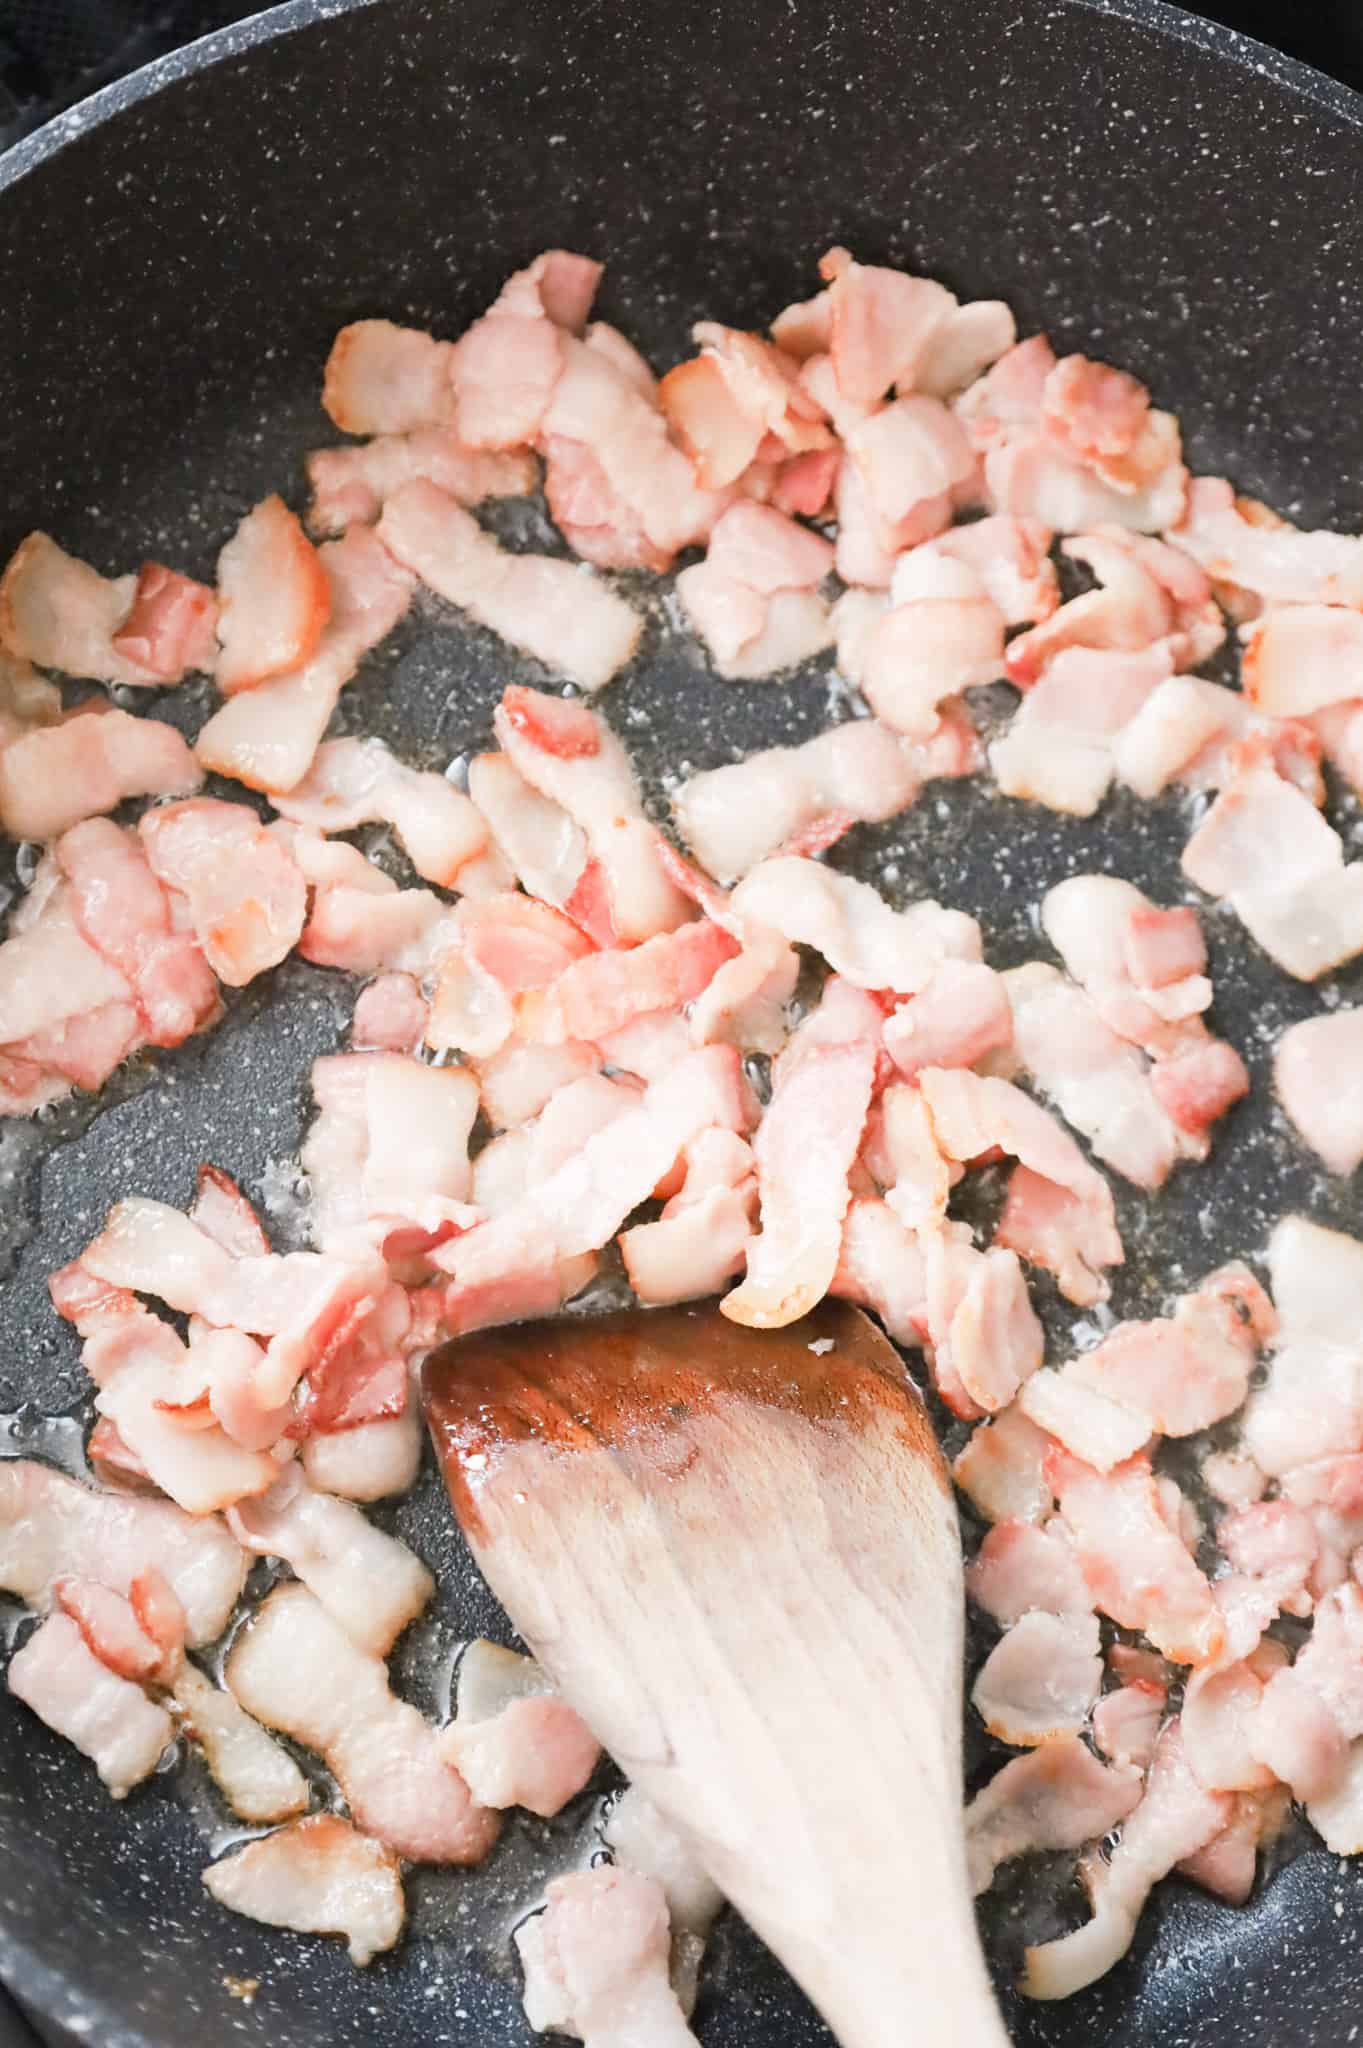 chopped bacon pieces cooking in a skillet